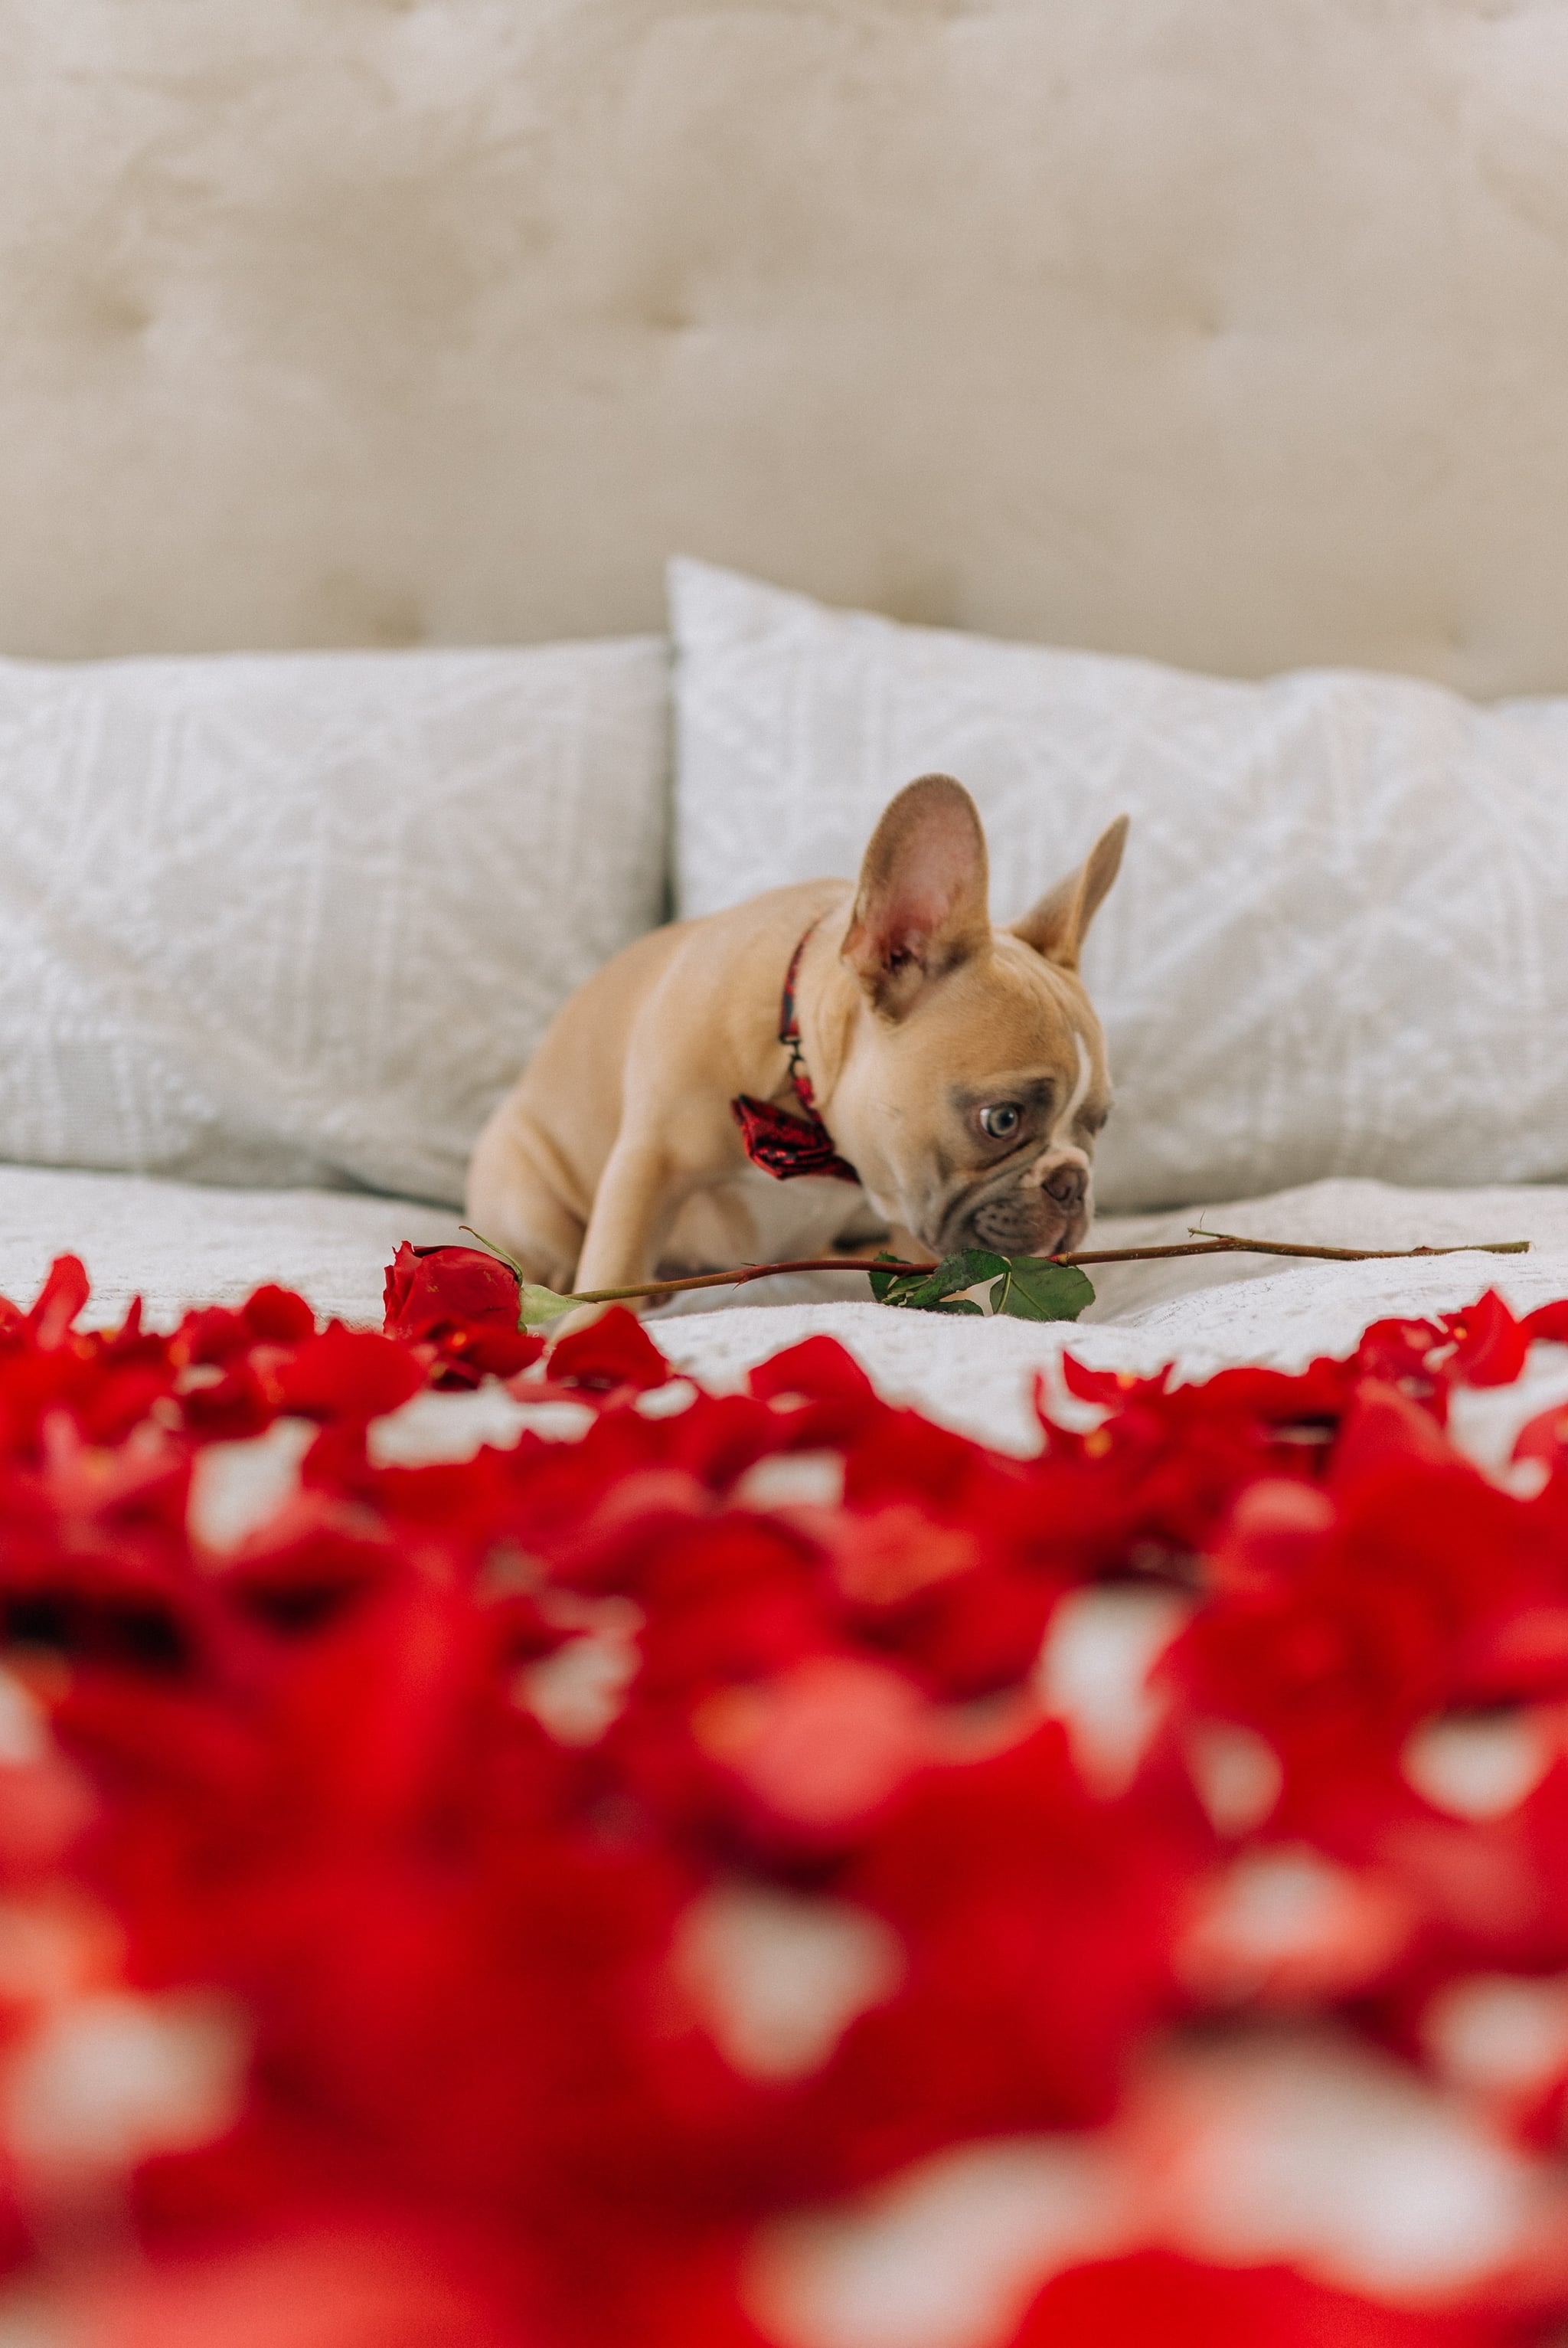 Valentine's Day Wallpaper: Dog On Bed Of Roses. The Dreamiest iPhone Wallpaper For Valentine's Day That Fit Any Aesthetic